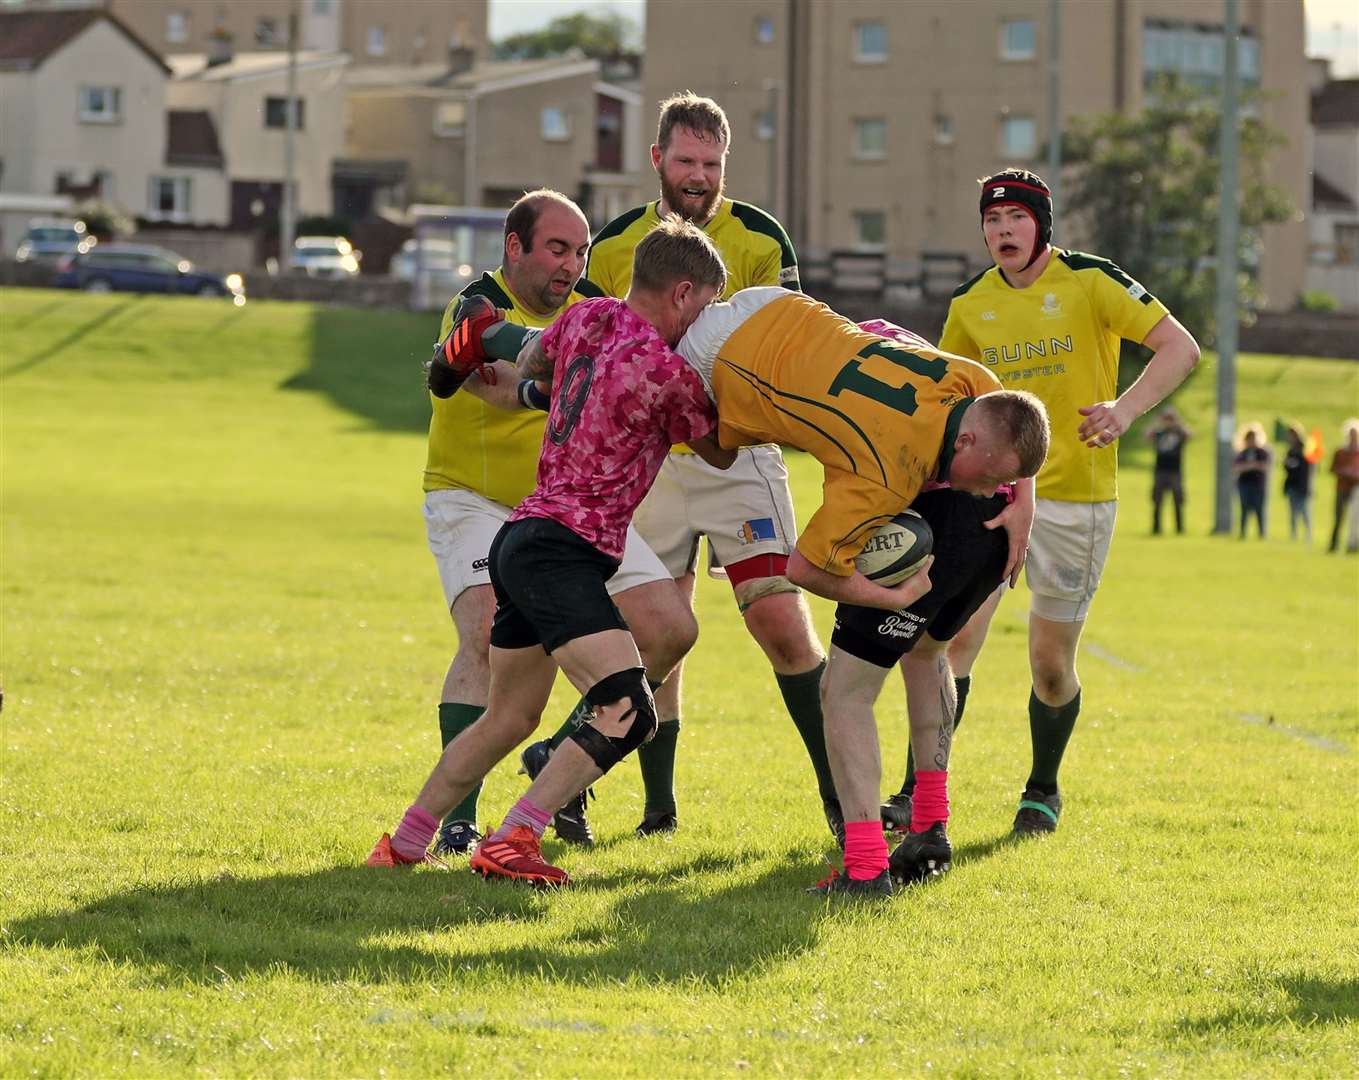 Craig Gunn of Caithness 2nd XV is upended but luckily he was put down safely. Picture: James Gunn